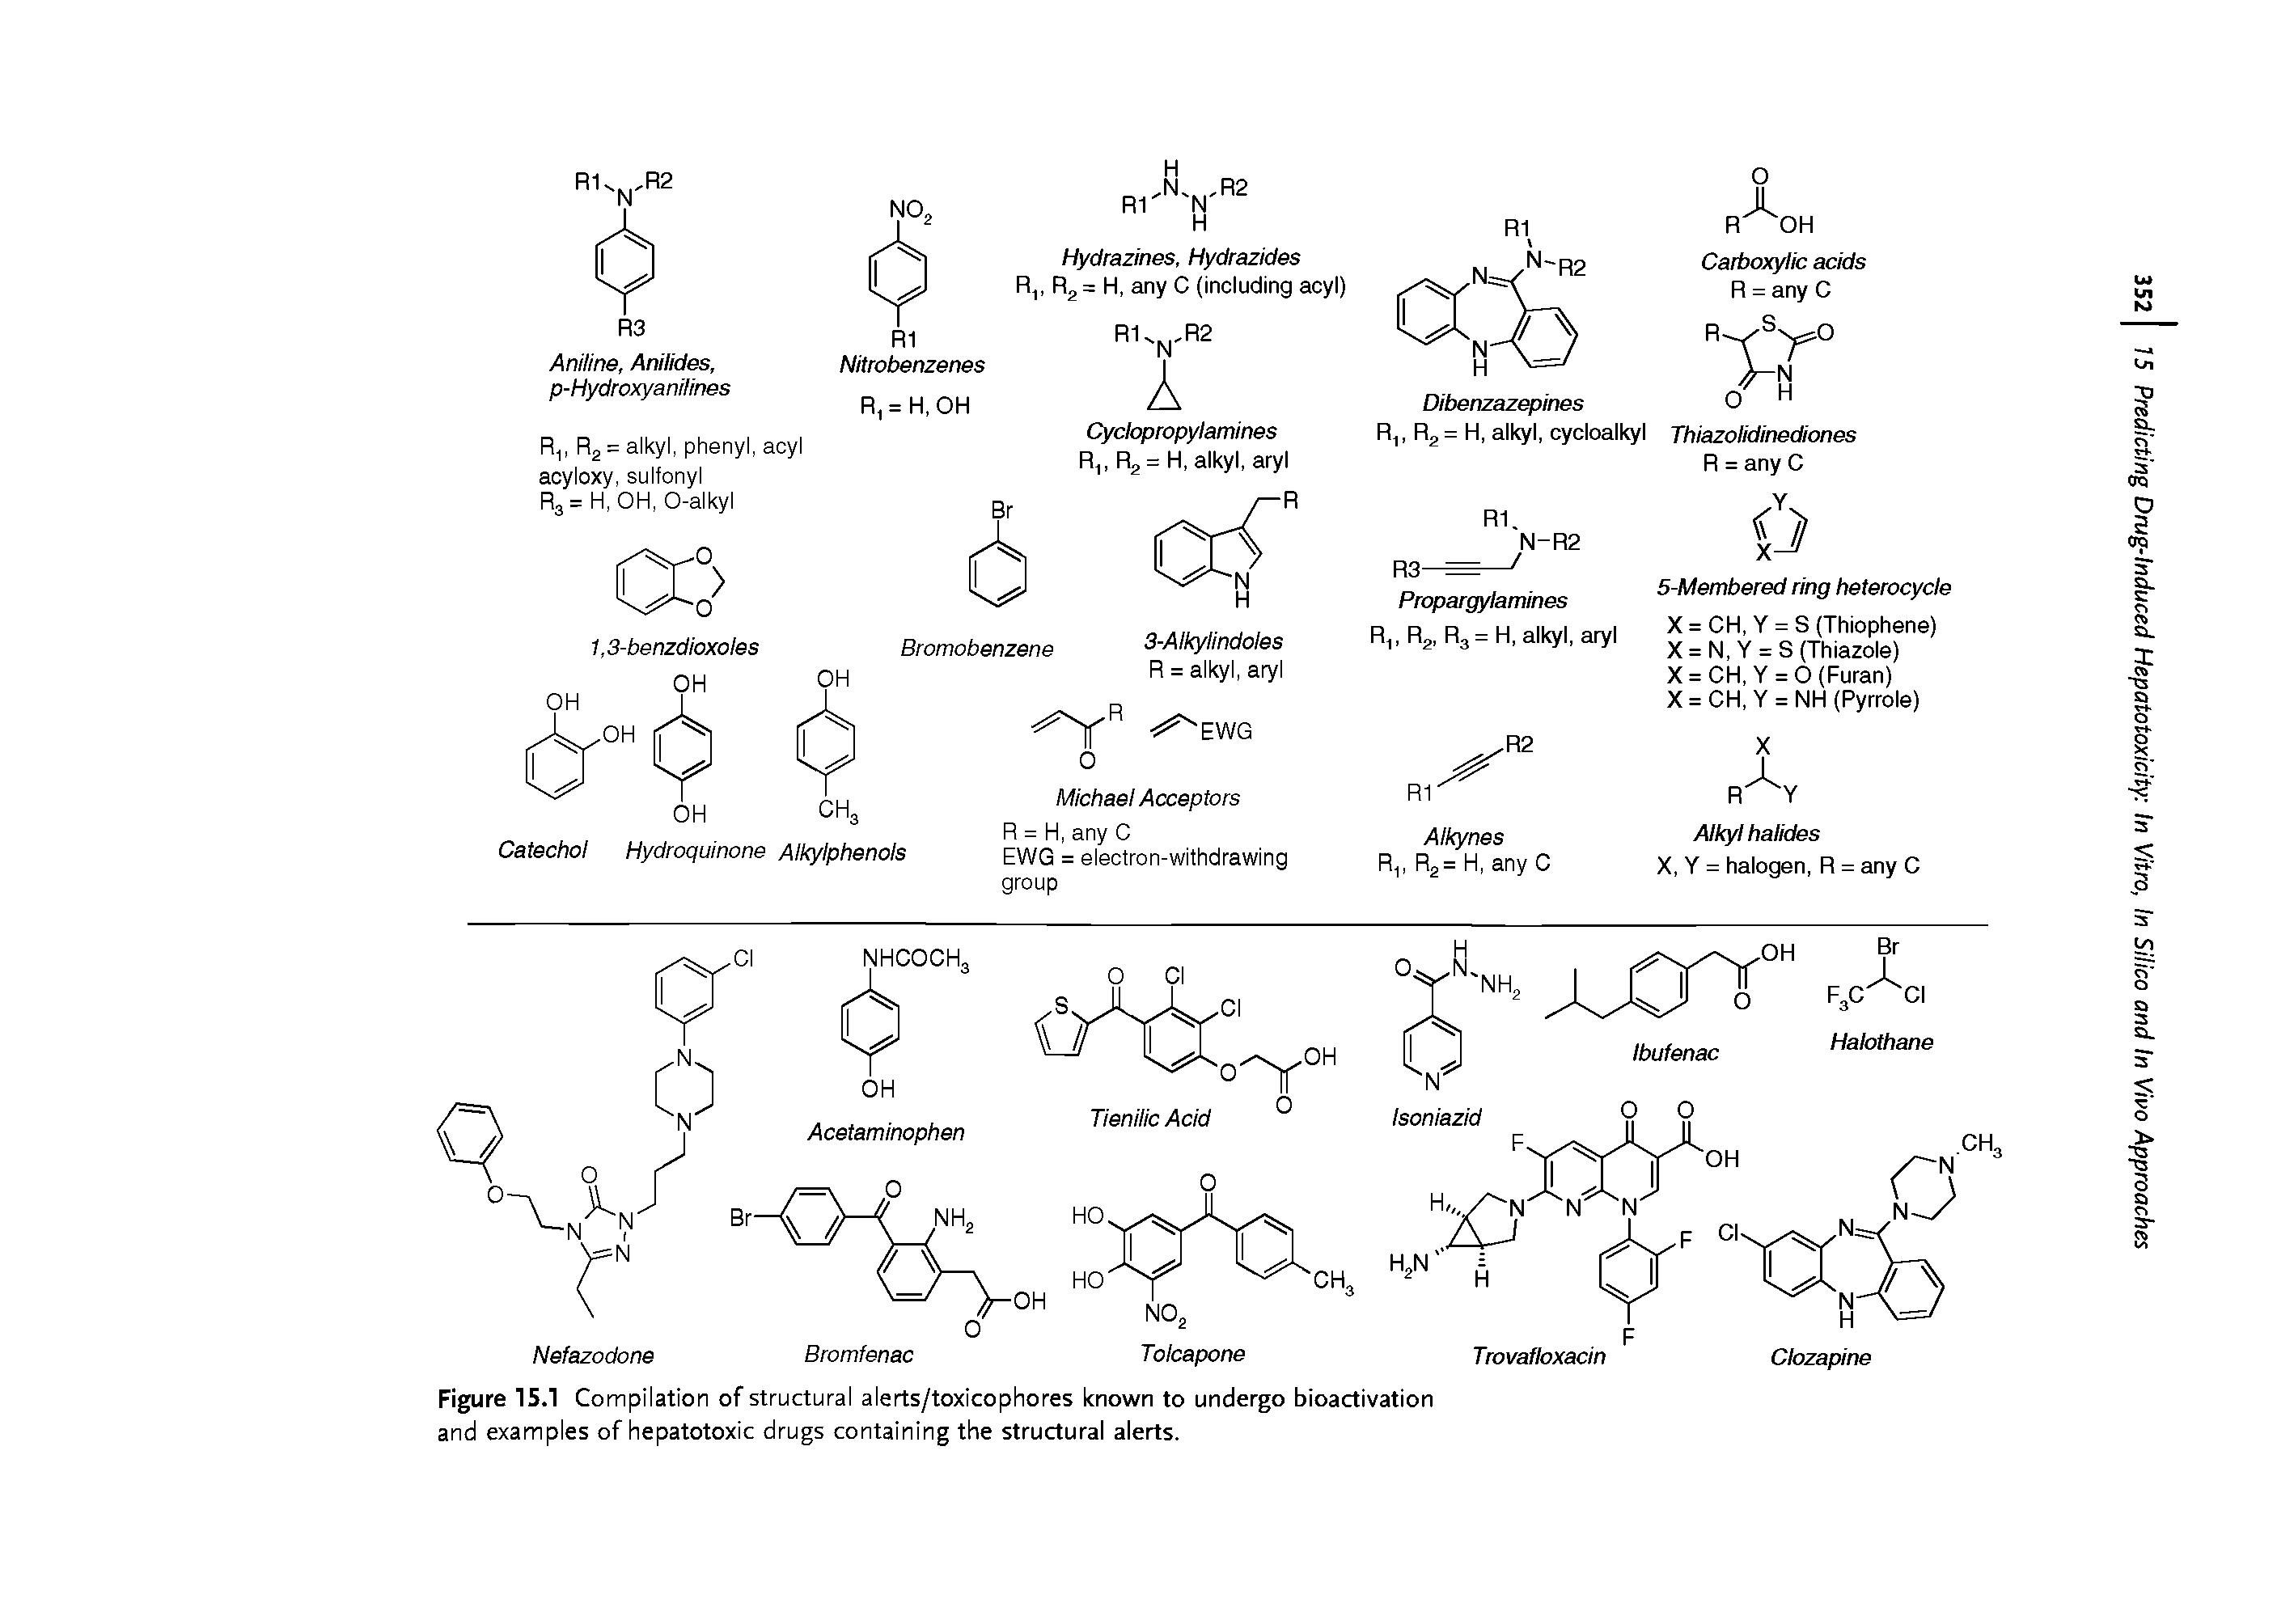 Figure 15.1 Compilation of structural alerts/toxicophores known to undergo bioactivation and examples of hepatotoxic drugs containing the structural alerts.